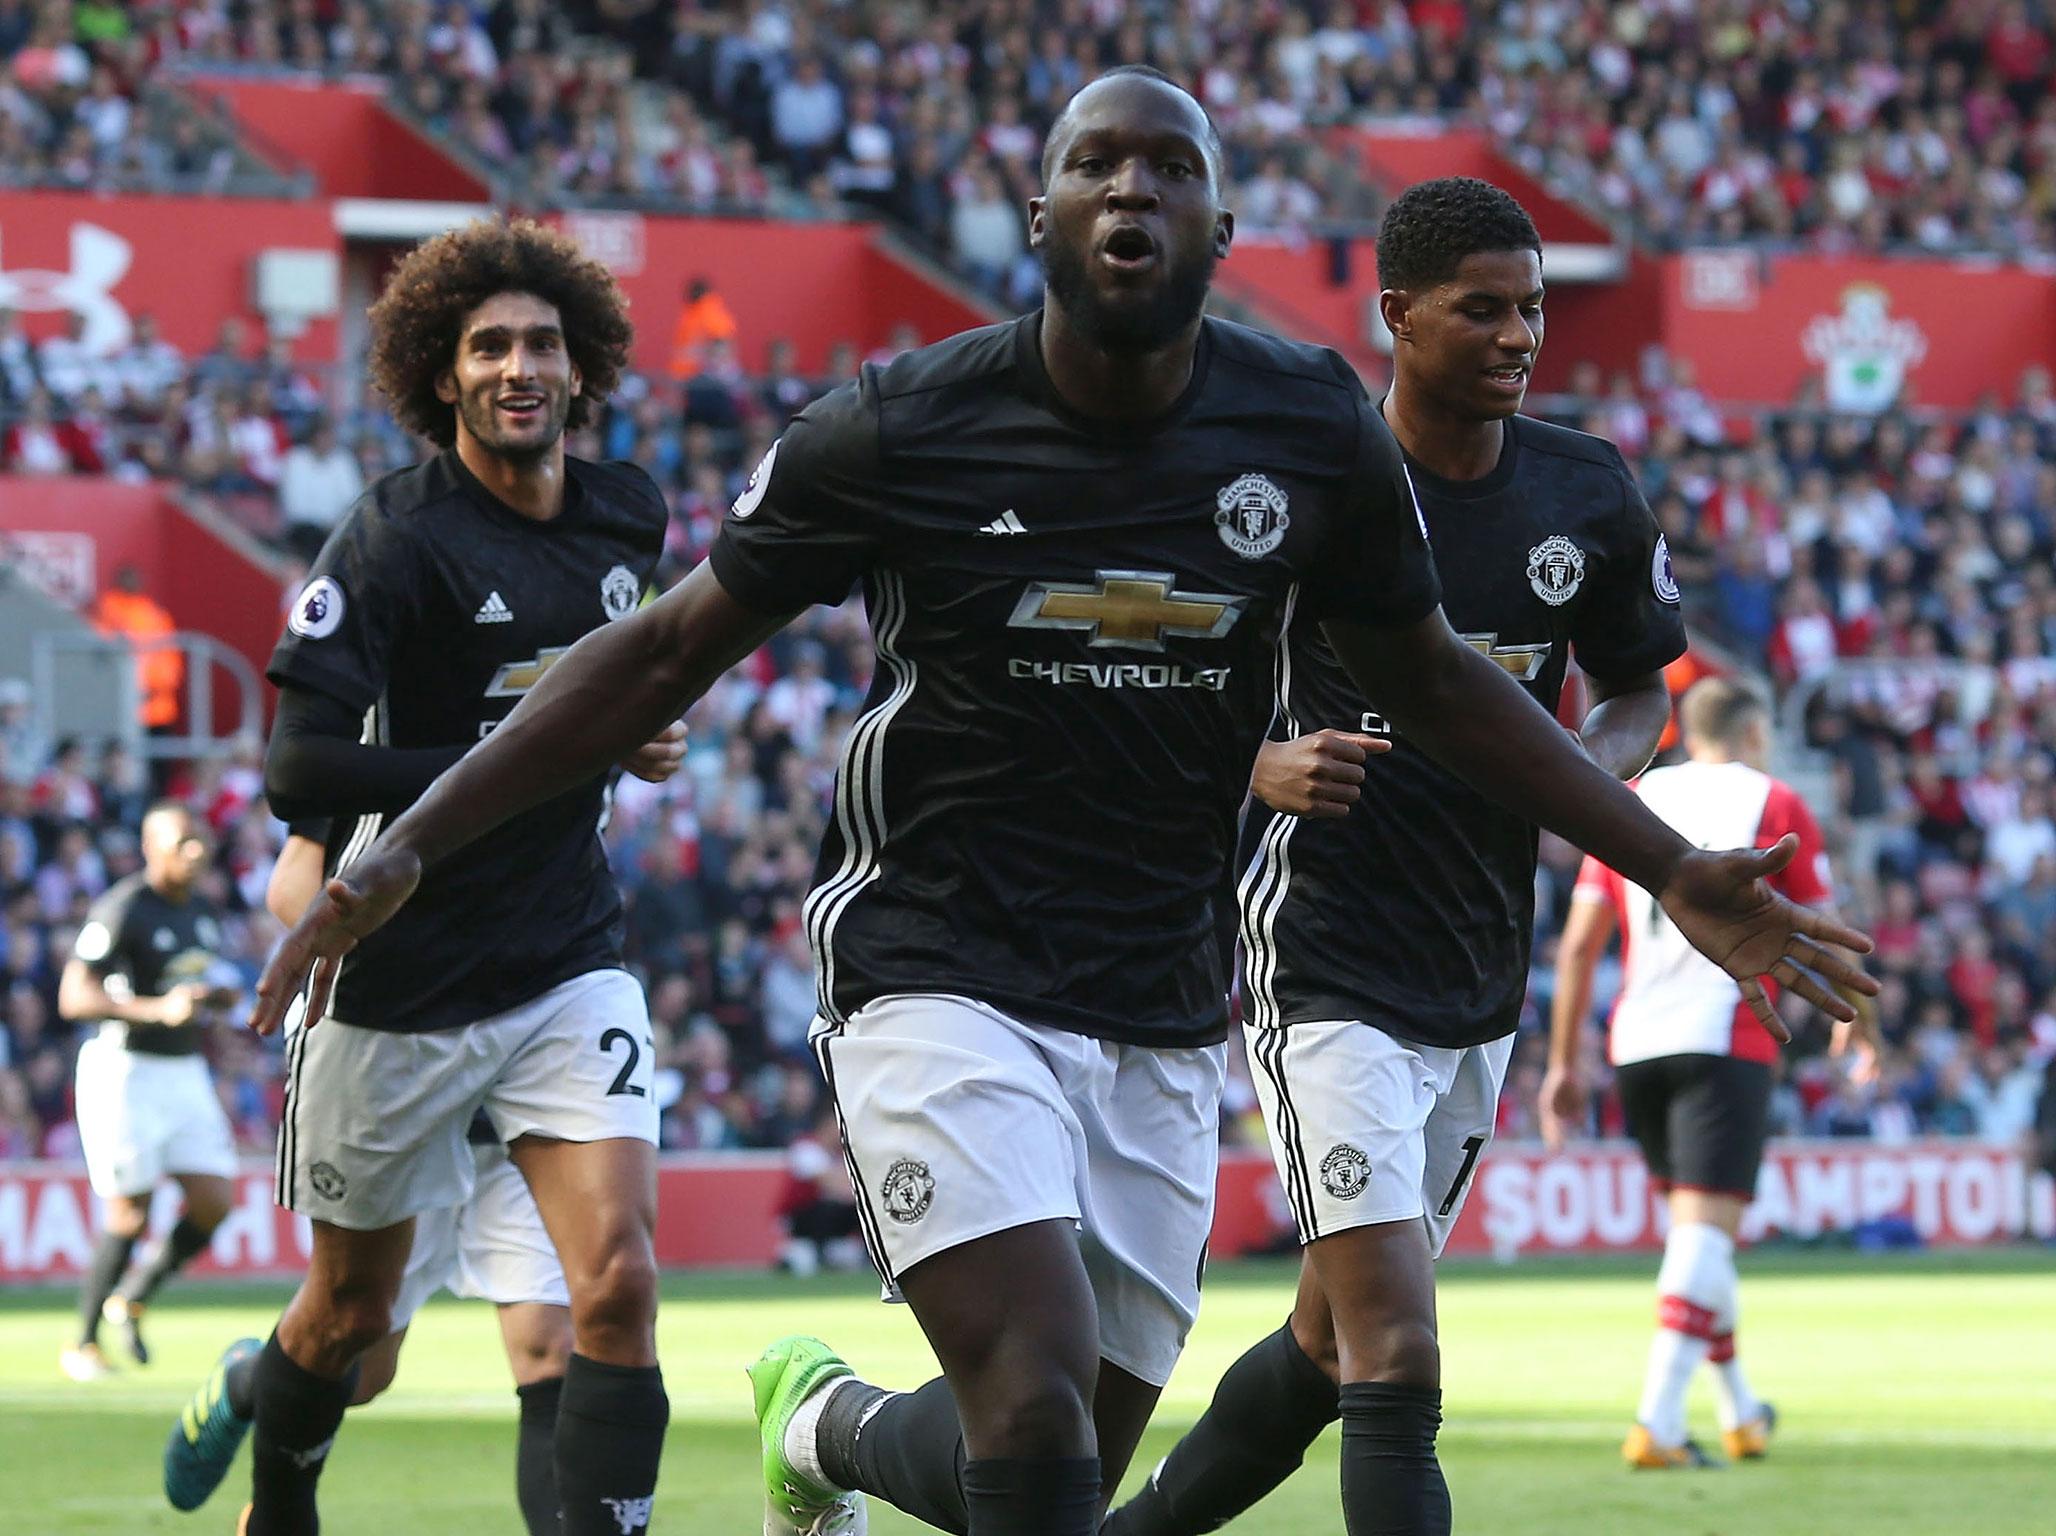 Romelu Lukaku scored the only goal of the game at St Mary's